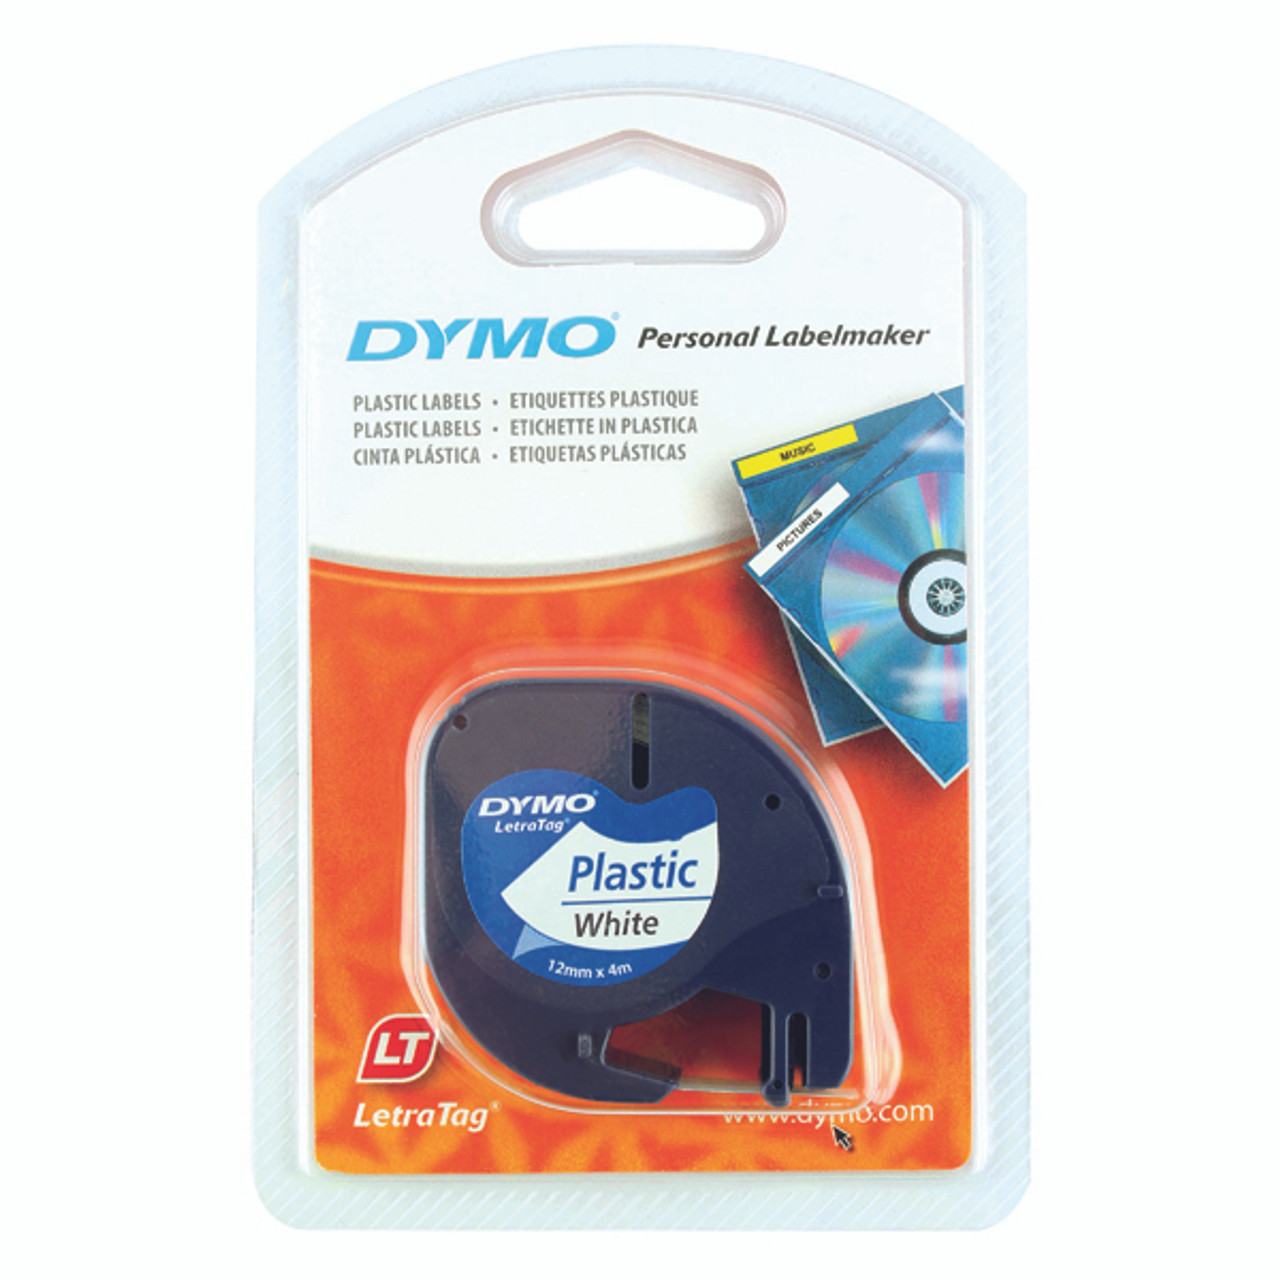 Dymo Letratag Plastic Tape 12mmx4m White PRL S0721660 - 9to5 Supplies